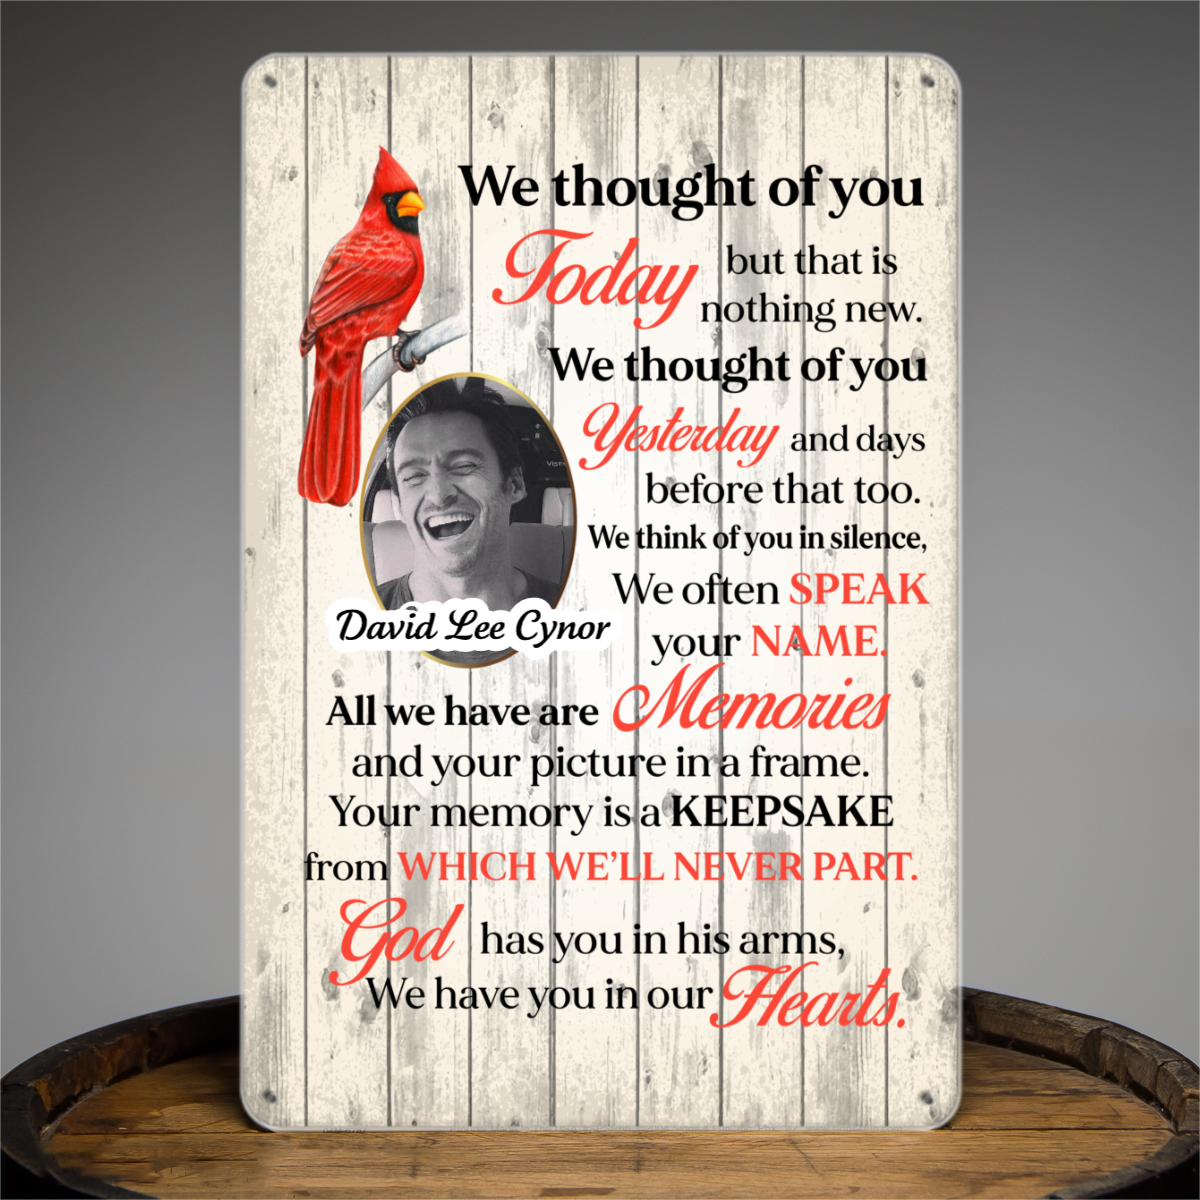 Thought Of You Today Memorial Personalized Tin Signs